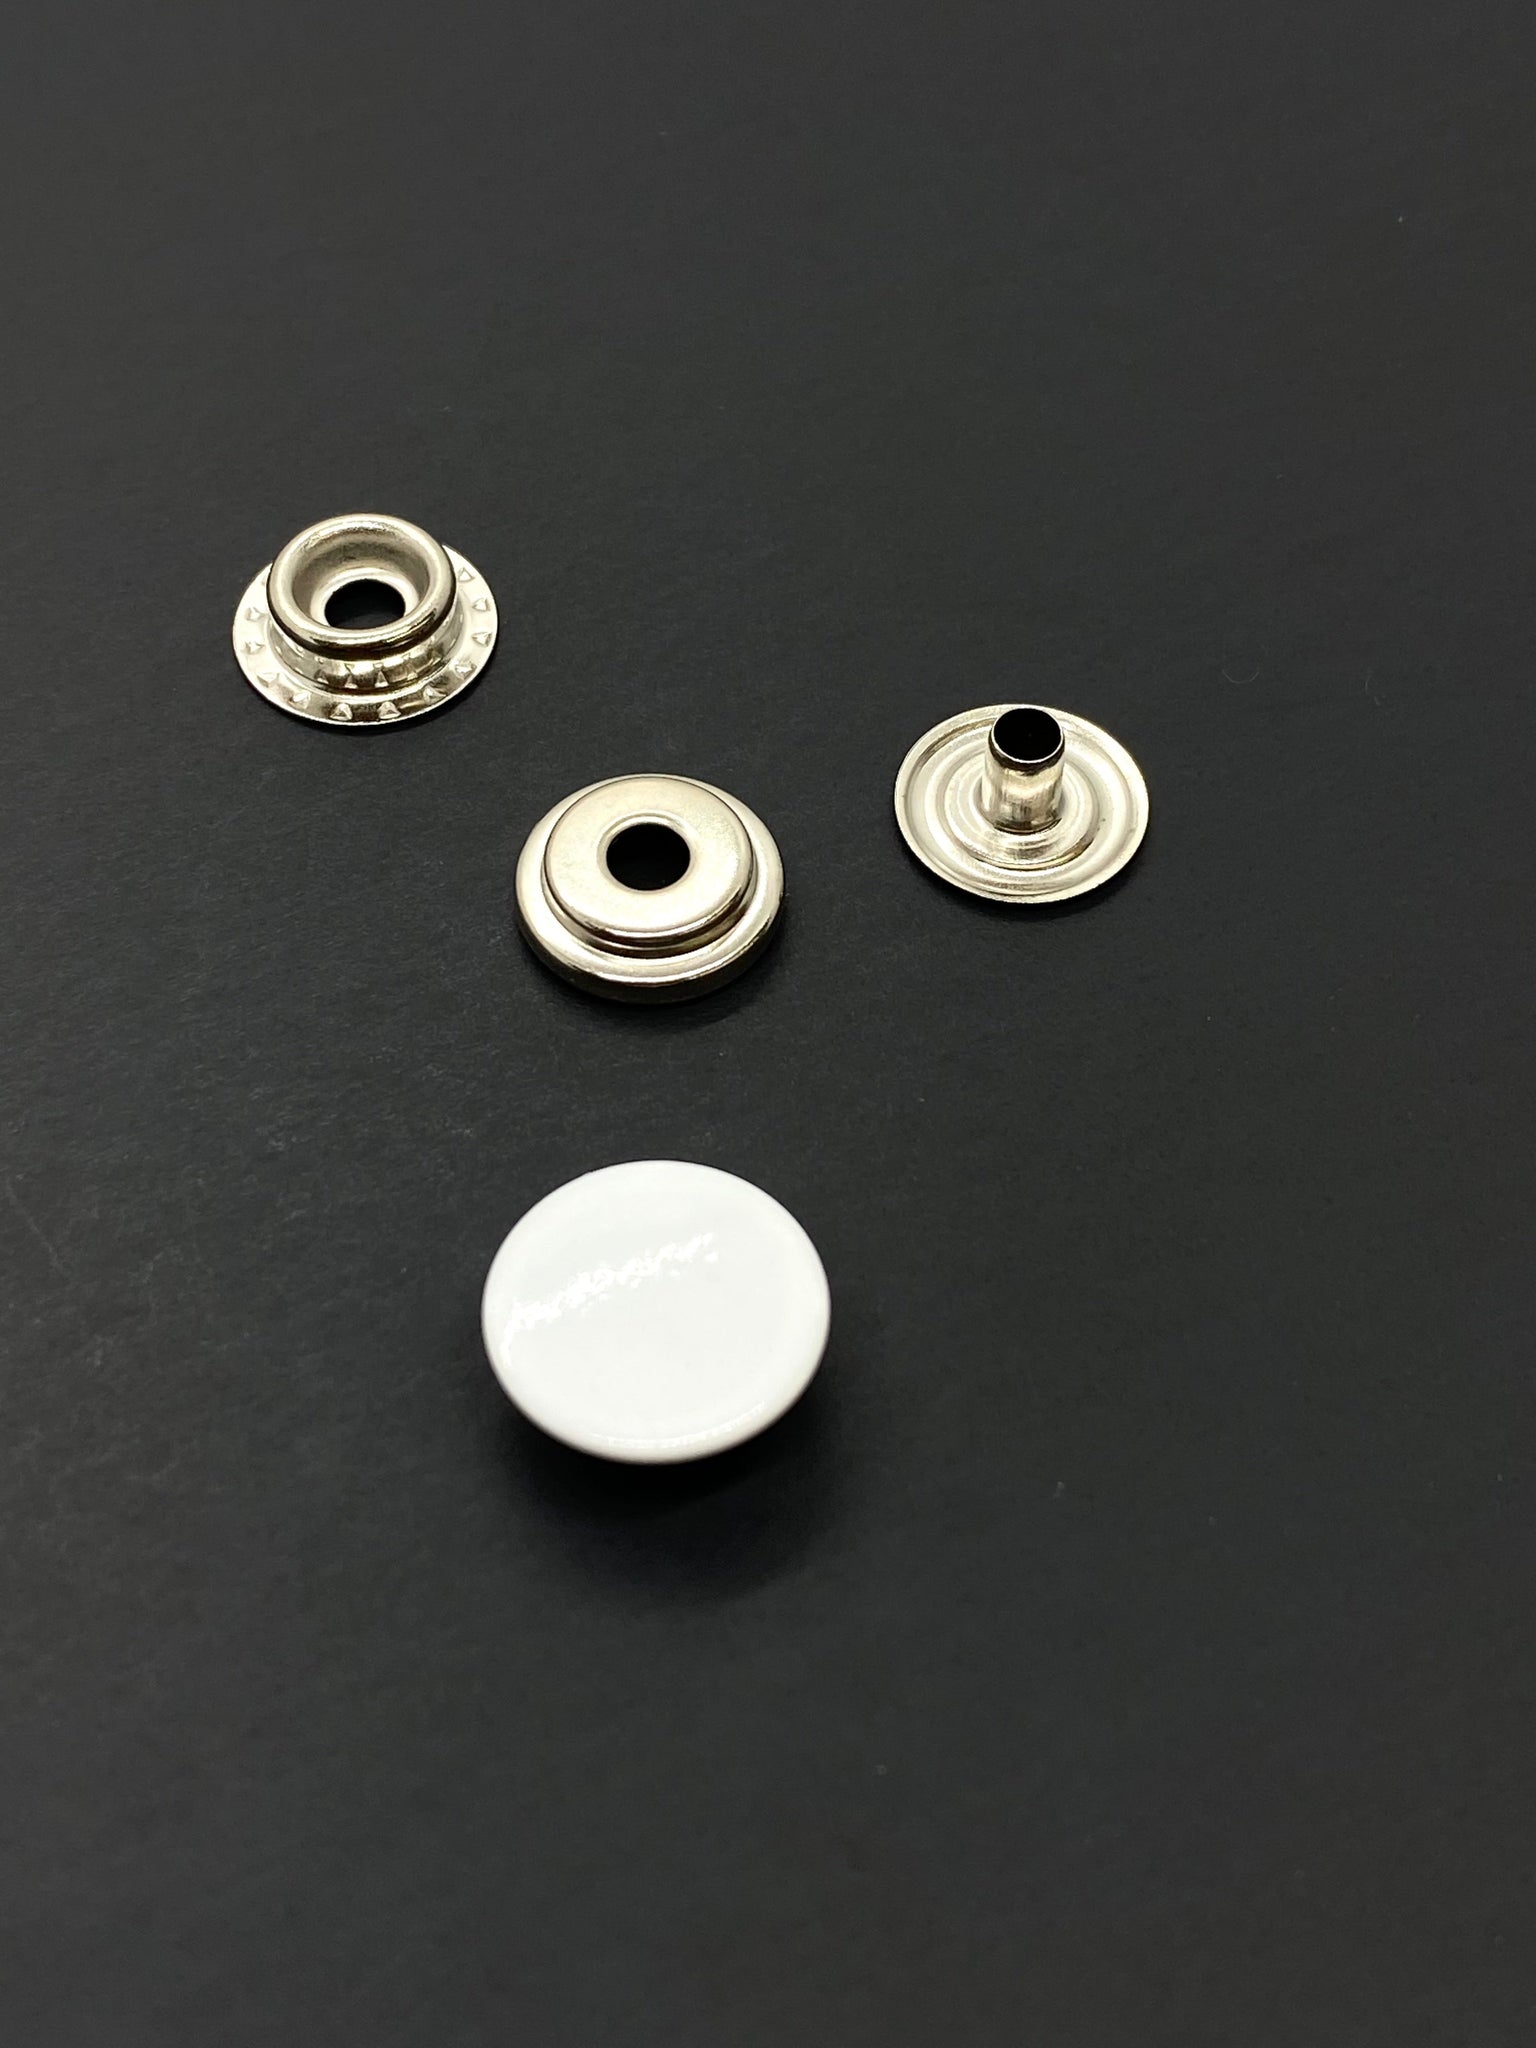 Nickel Copper Snap Fasteners Sewing on Press Studs Buttons for